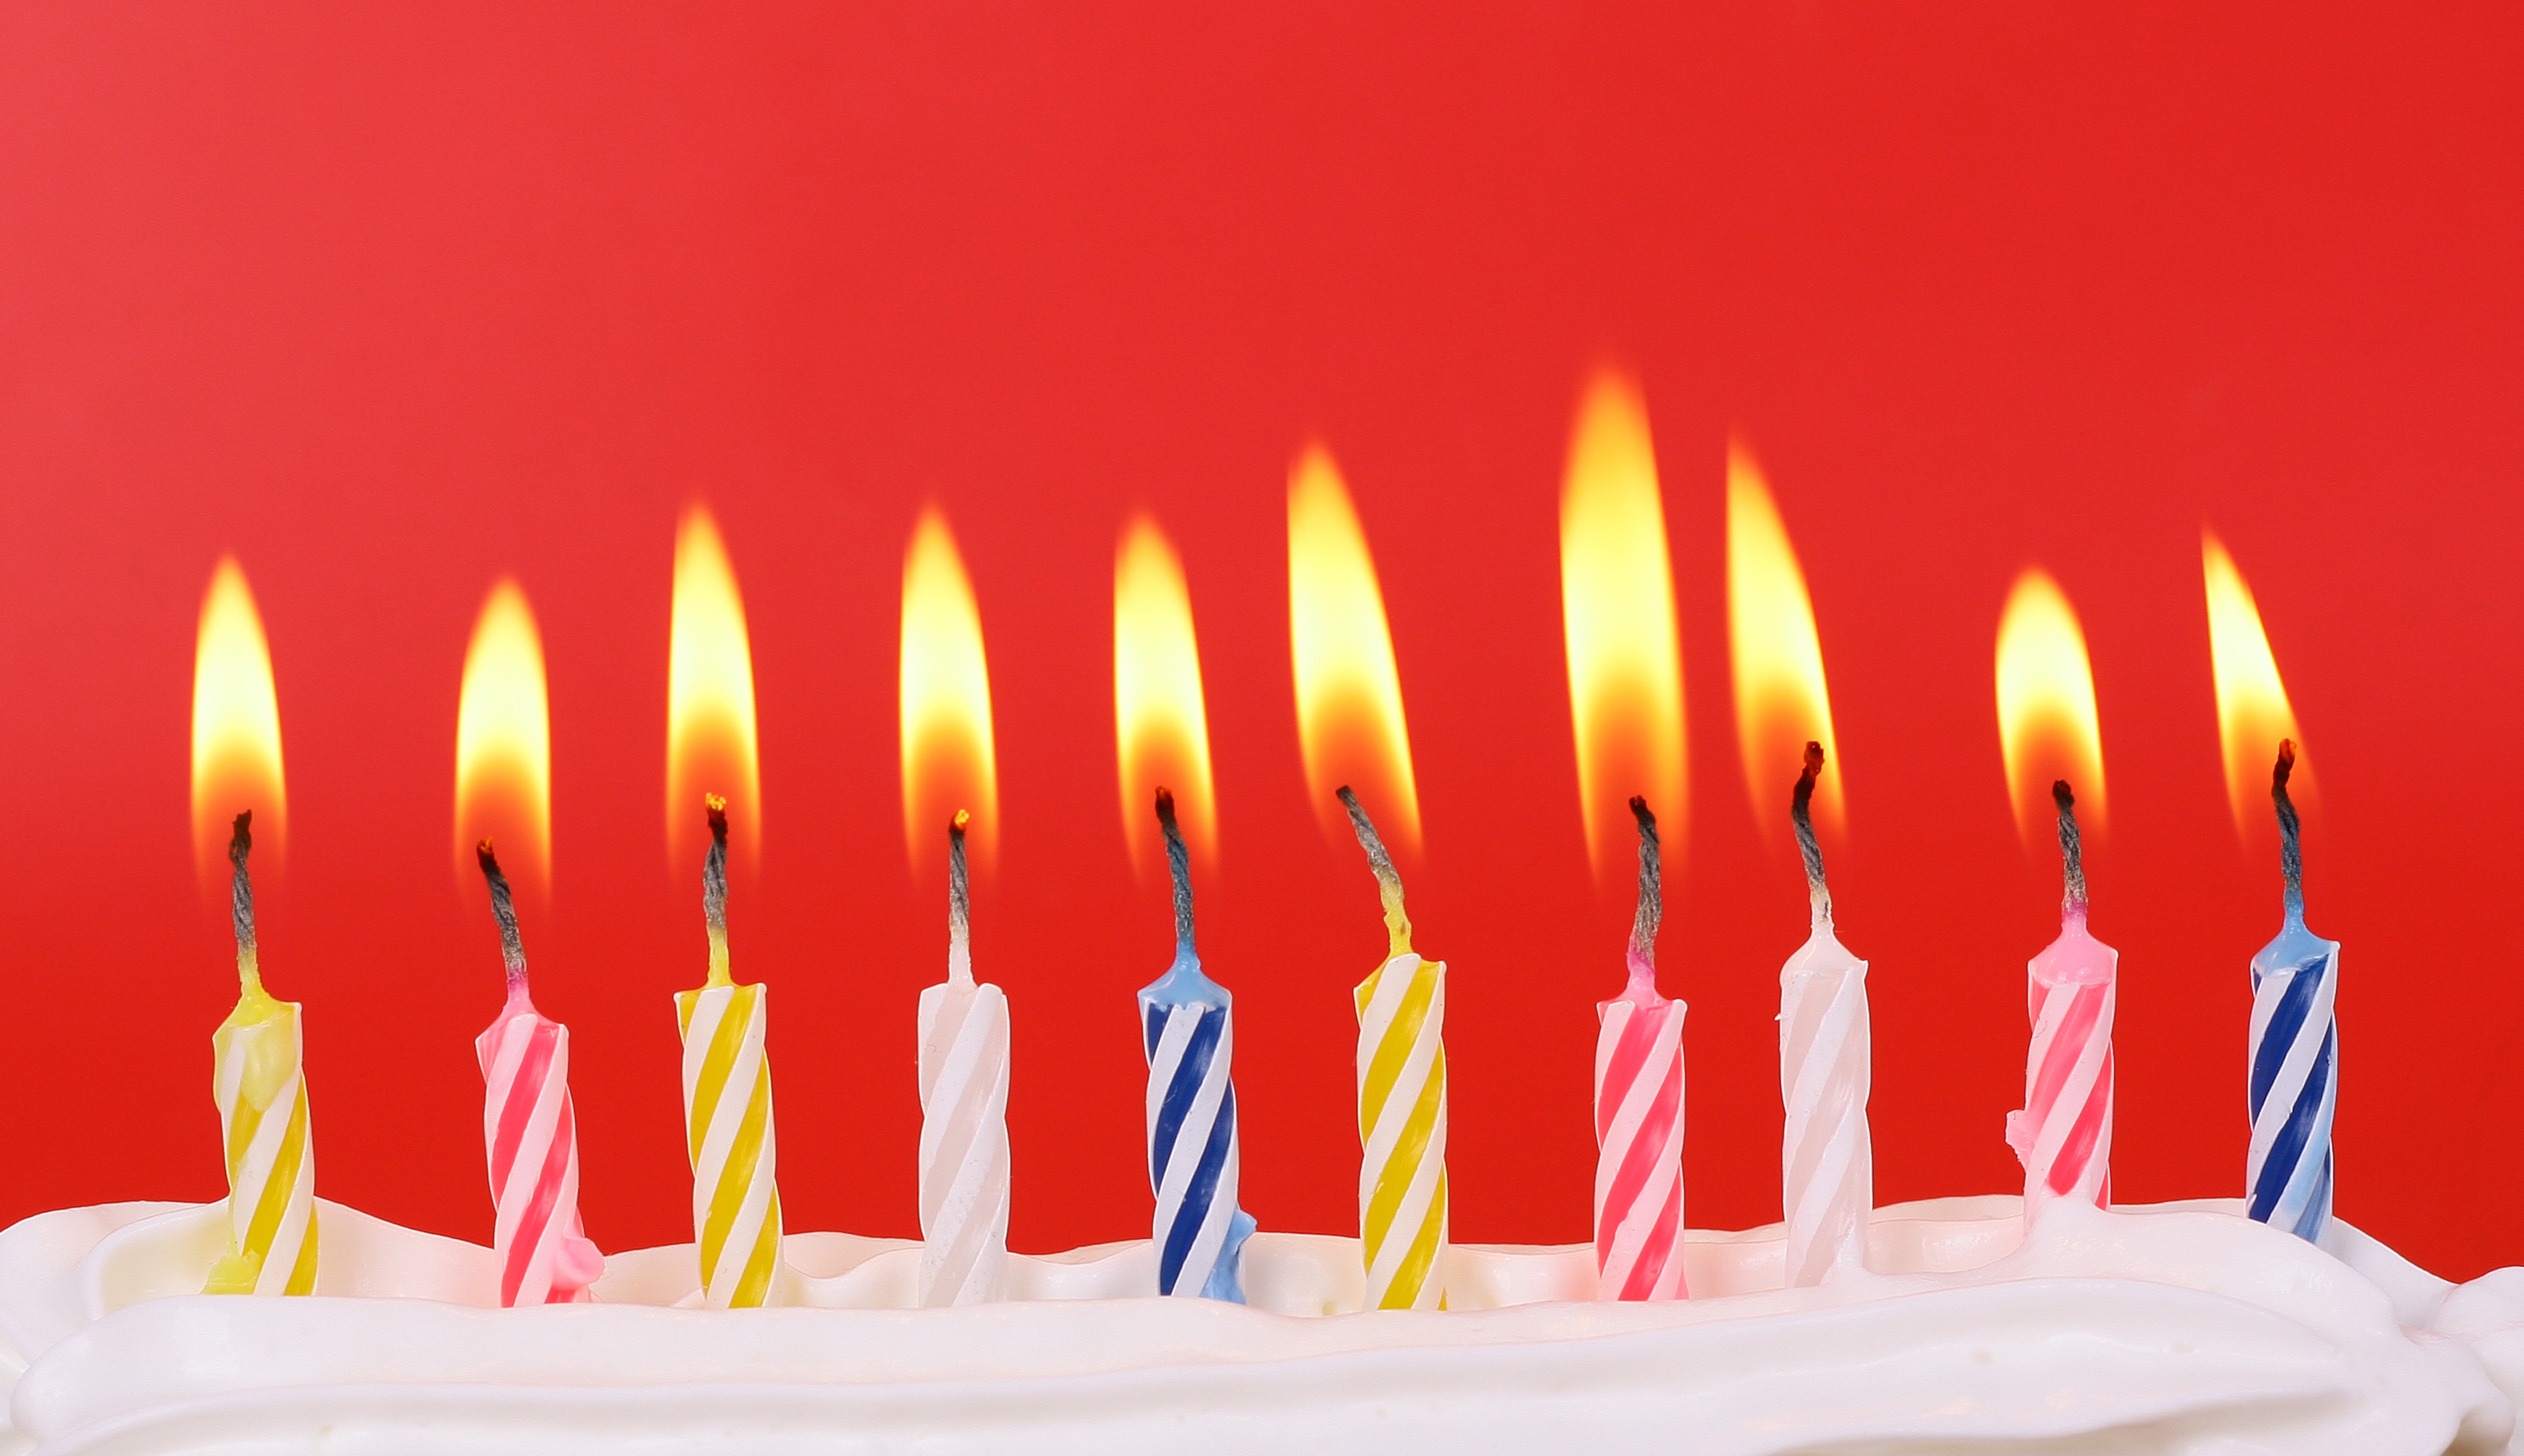 Row of ten colorful birthday candles lit on a red background